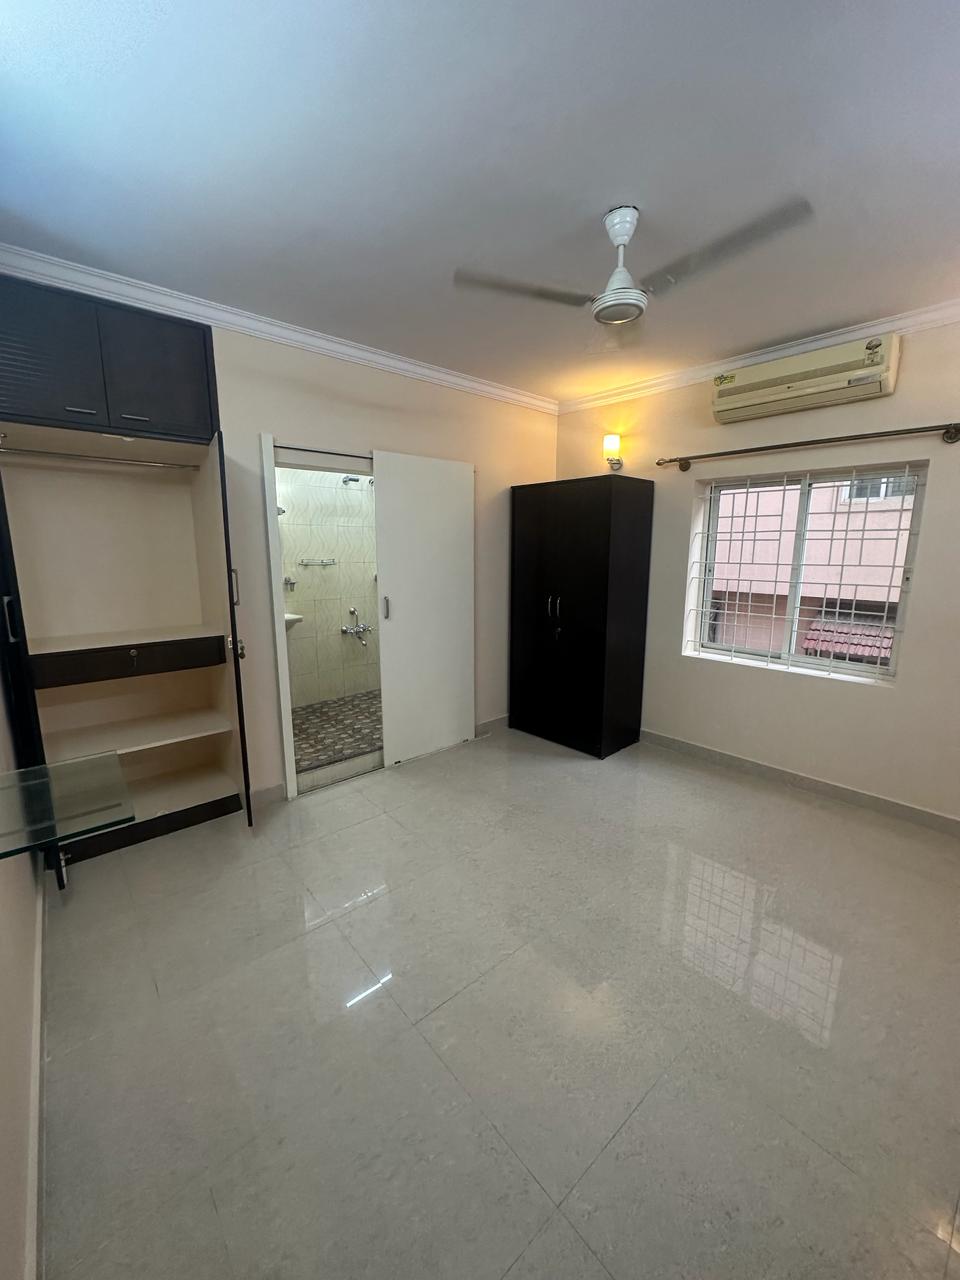 2 BHK Independent House for Lease Only at JAM-6323 in Nandini Layout